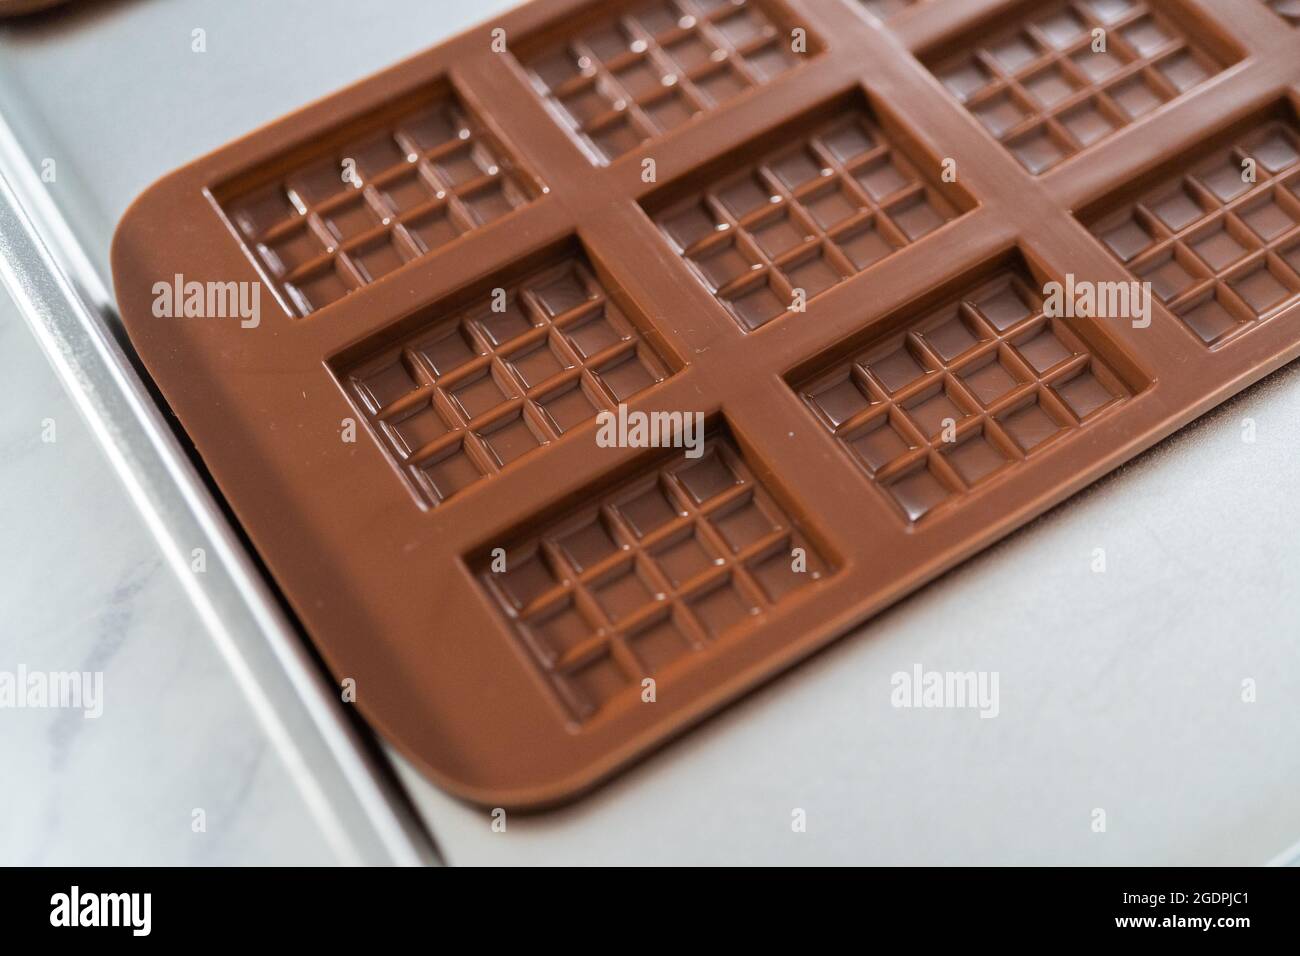 Filling Chocolate Silicone Molds Melted Chocolate Stock Photo